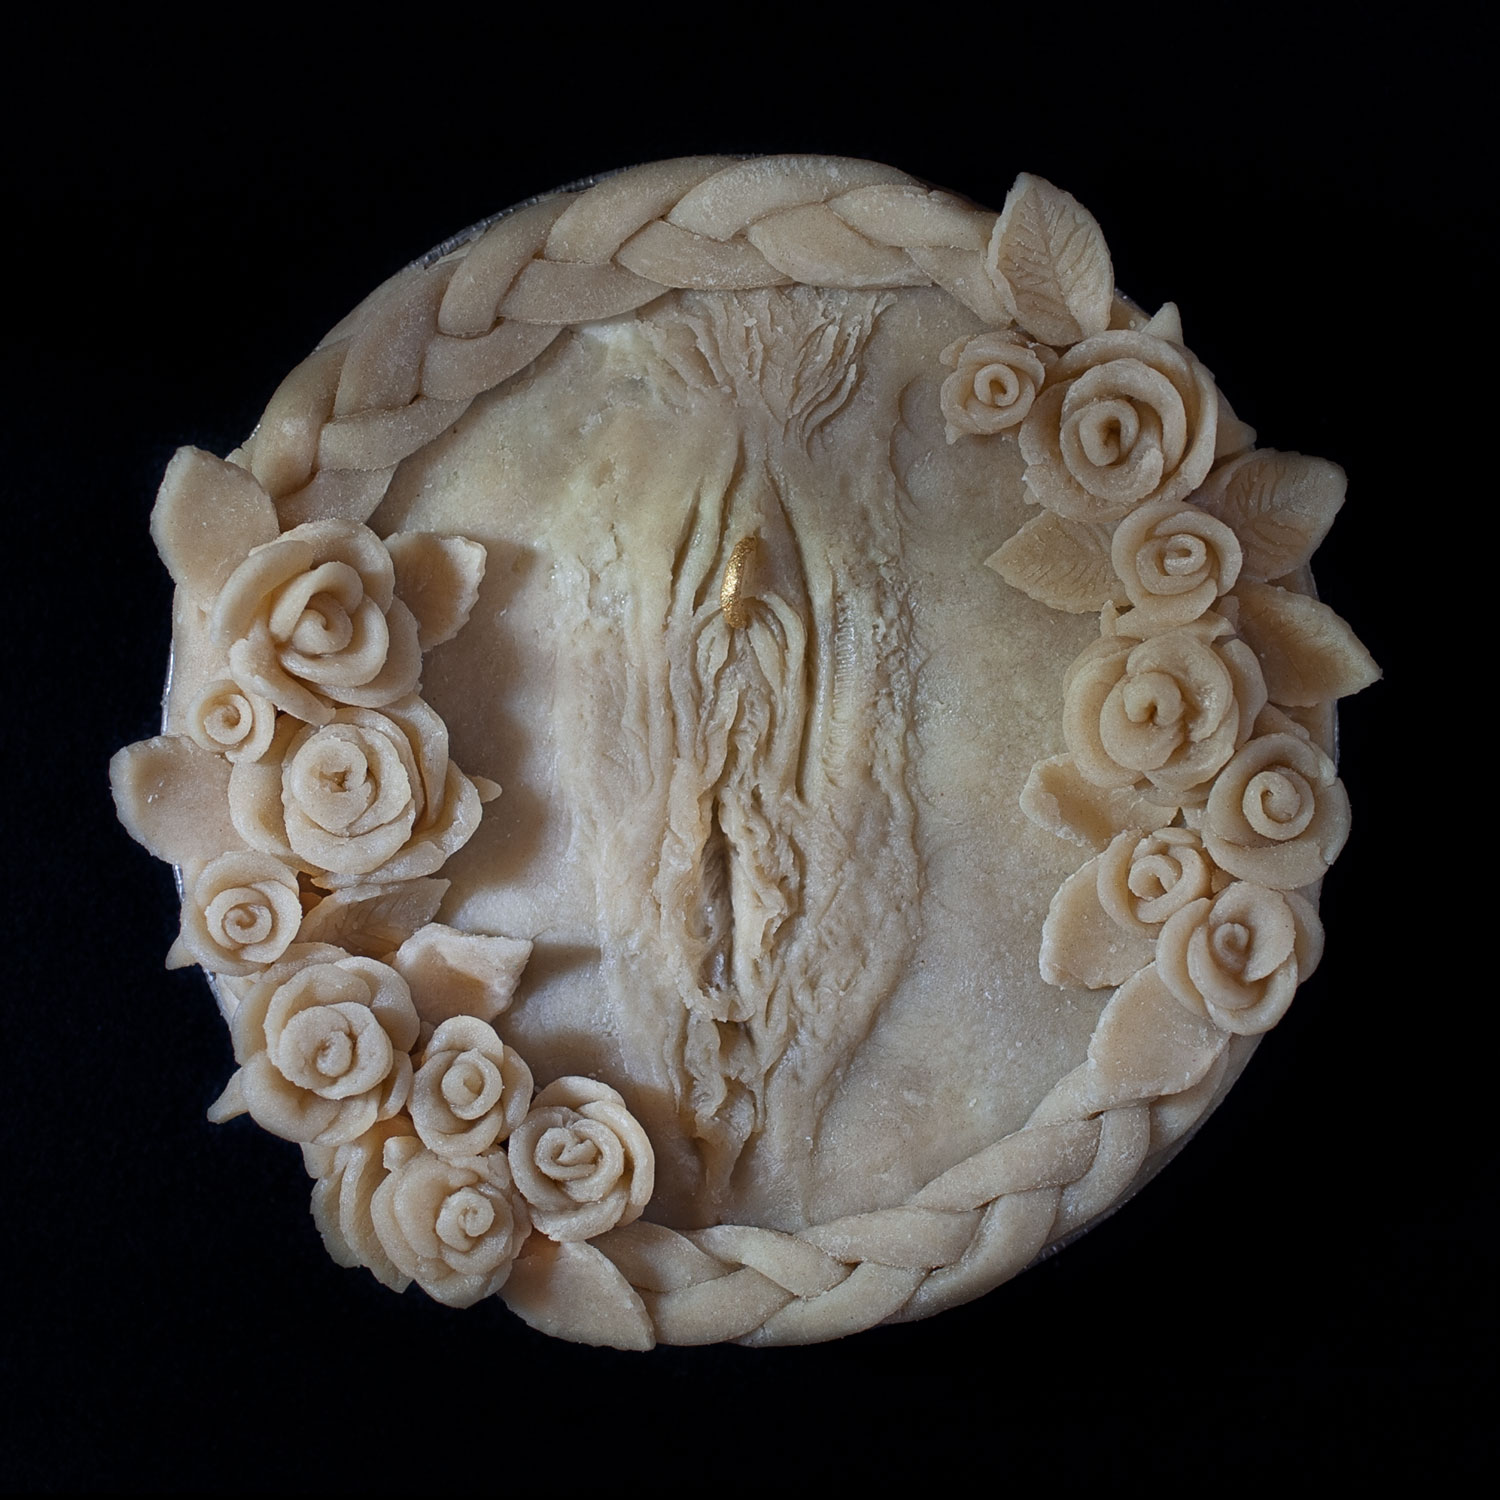 Unbaked six inch pie with pie crust art vulva with a golden ring piercing and roses surrounding it. 
